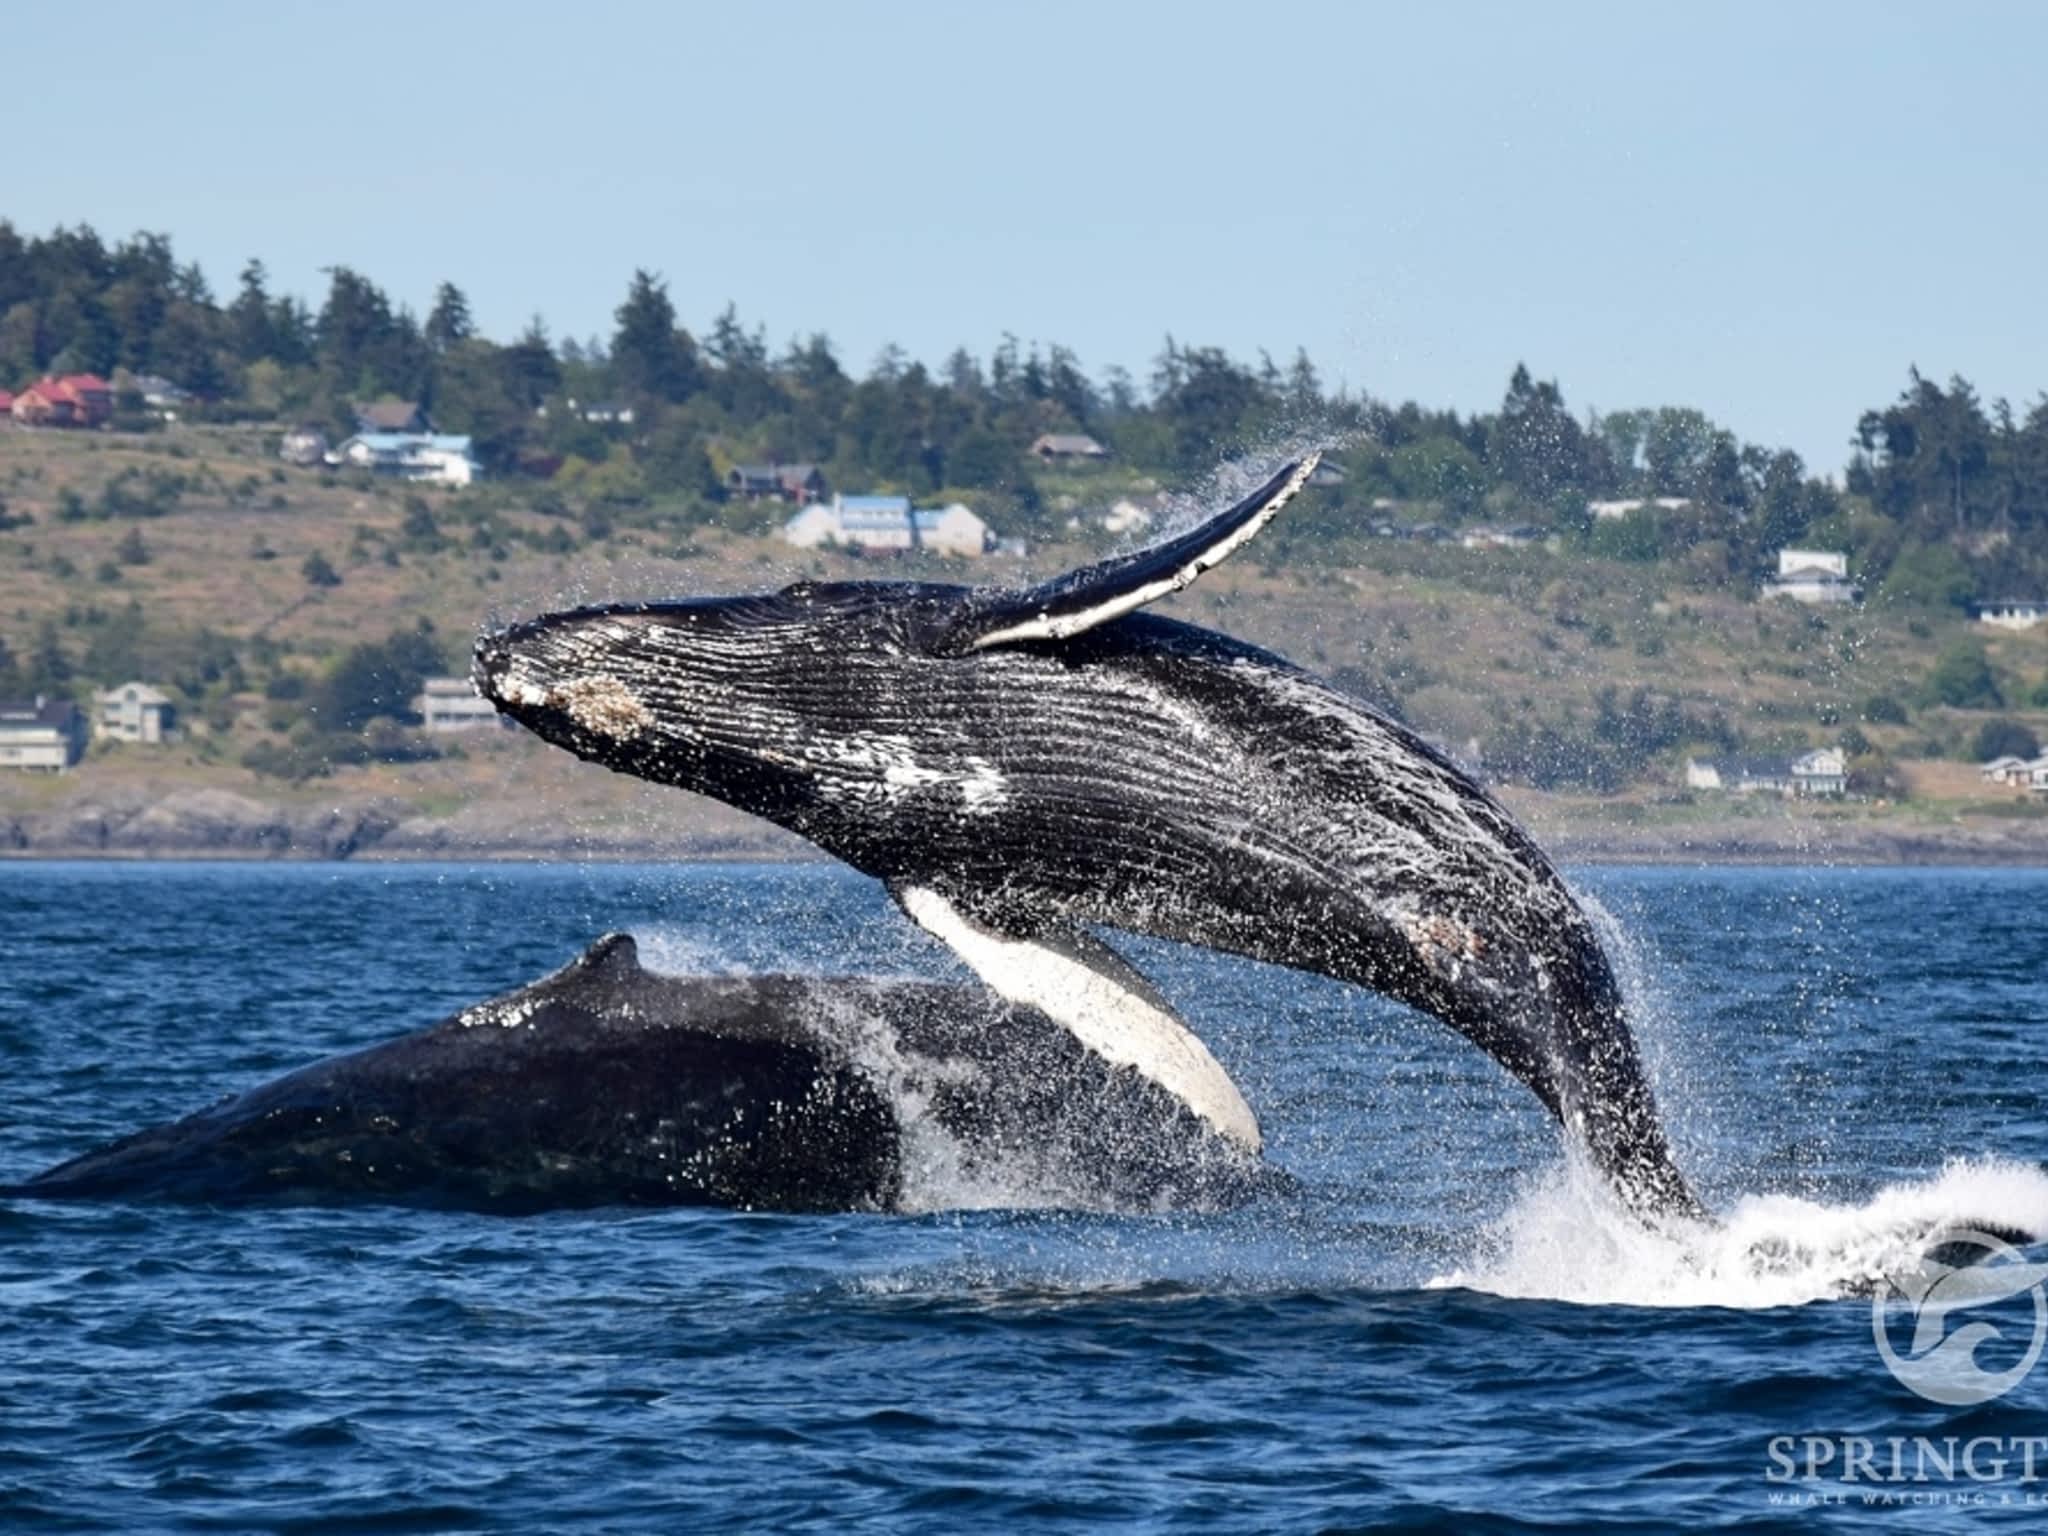 photo SpringTide Whale Watching & Eco Tours